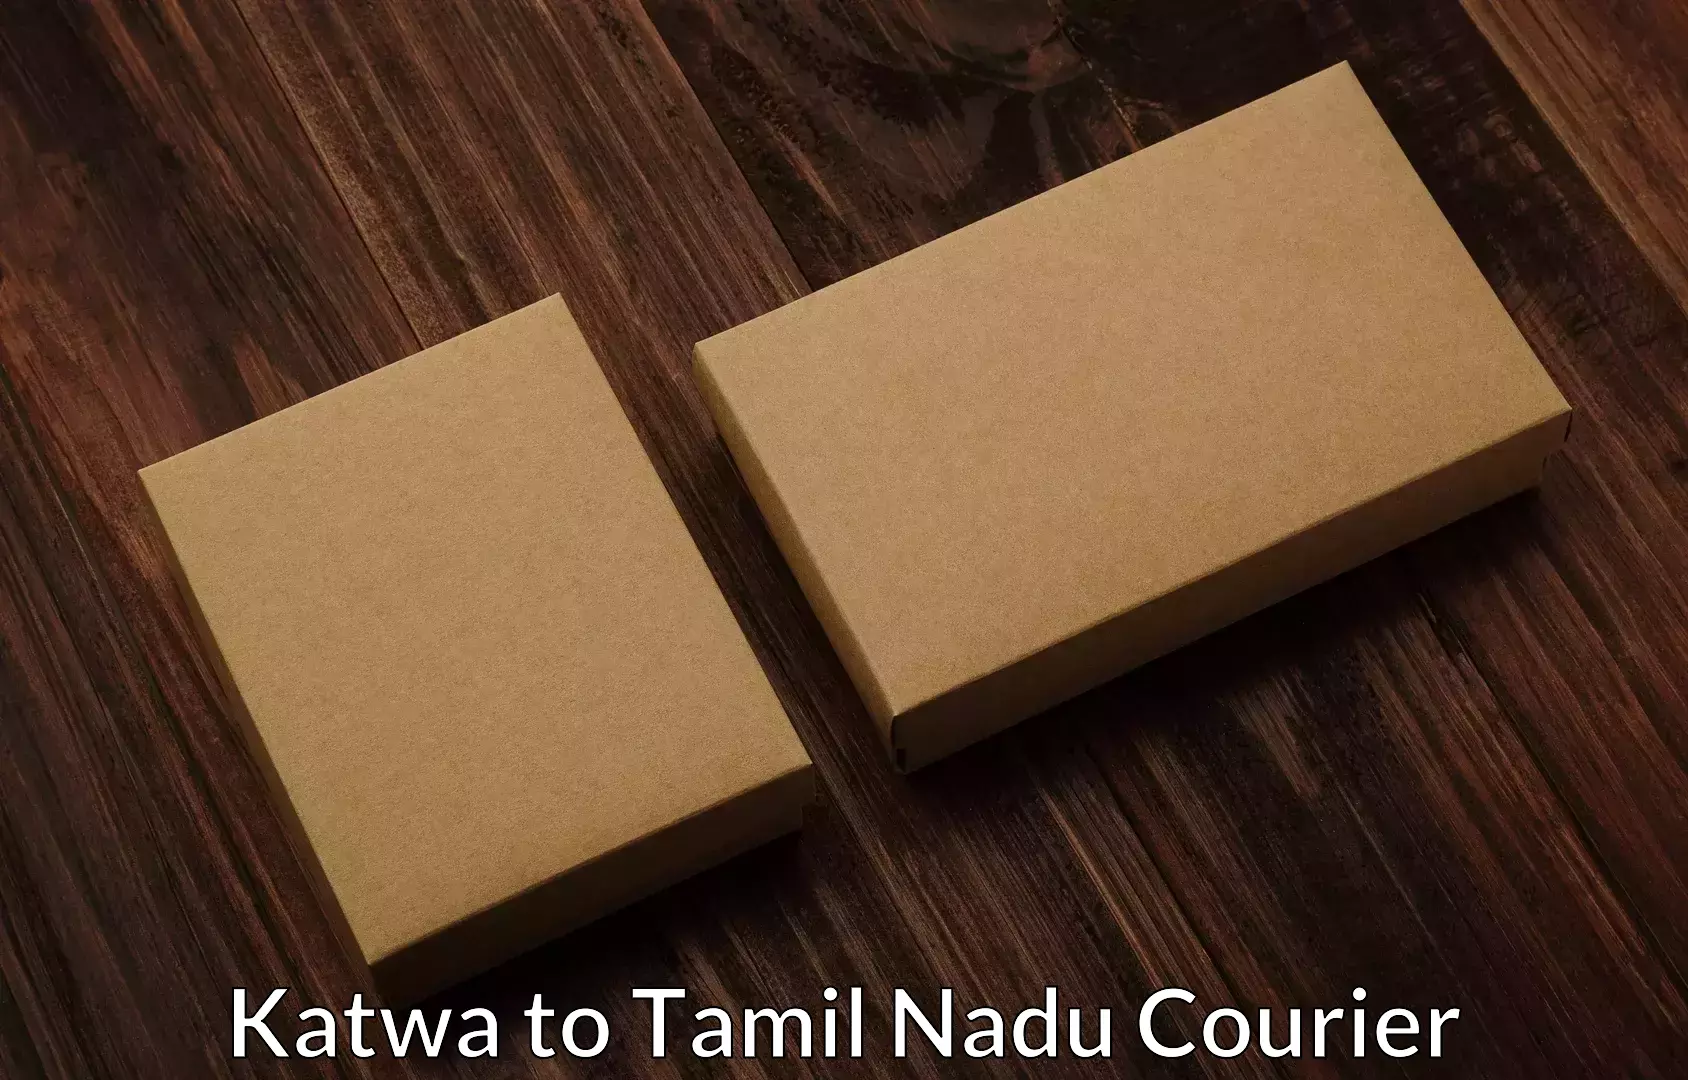 Moving and storage services Katwa to Ennore Port Chennai